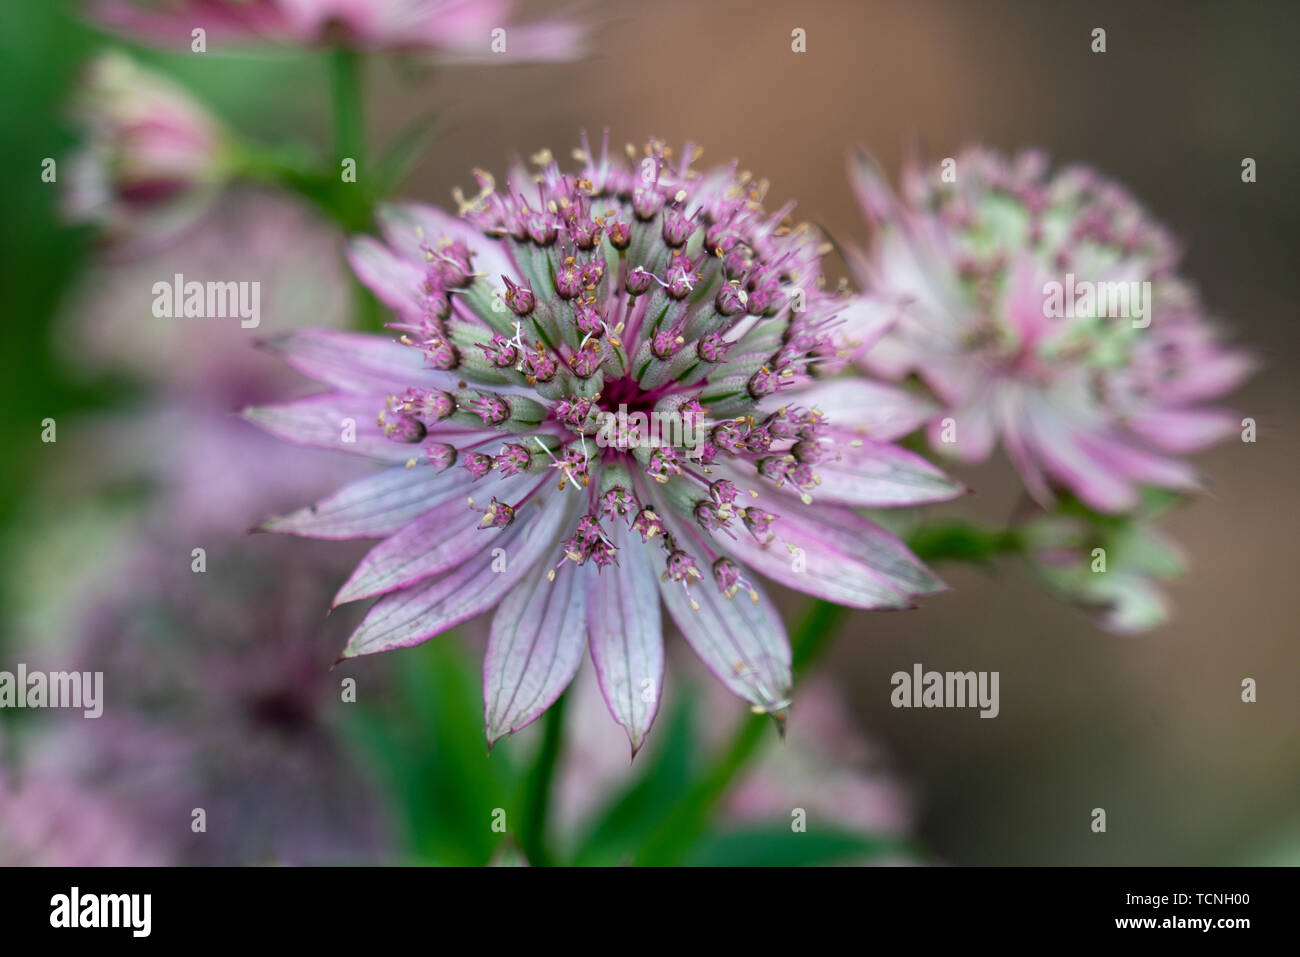 macro shot of pink flowers of astrantia major showing many details like pistils and pollen Stock Photo